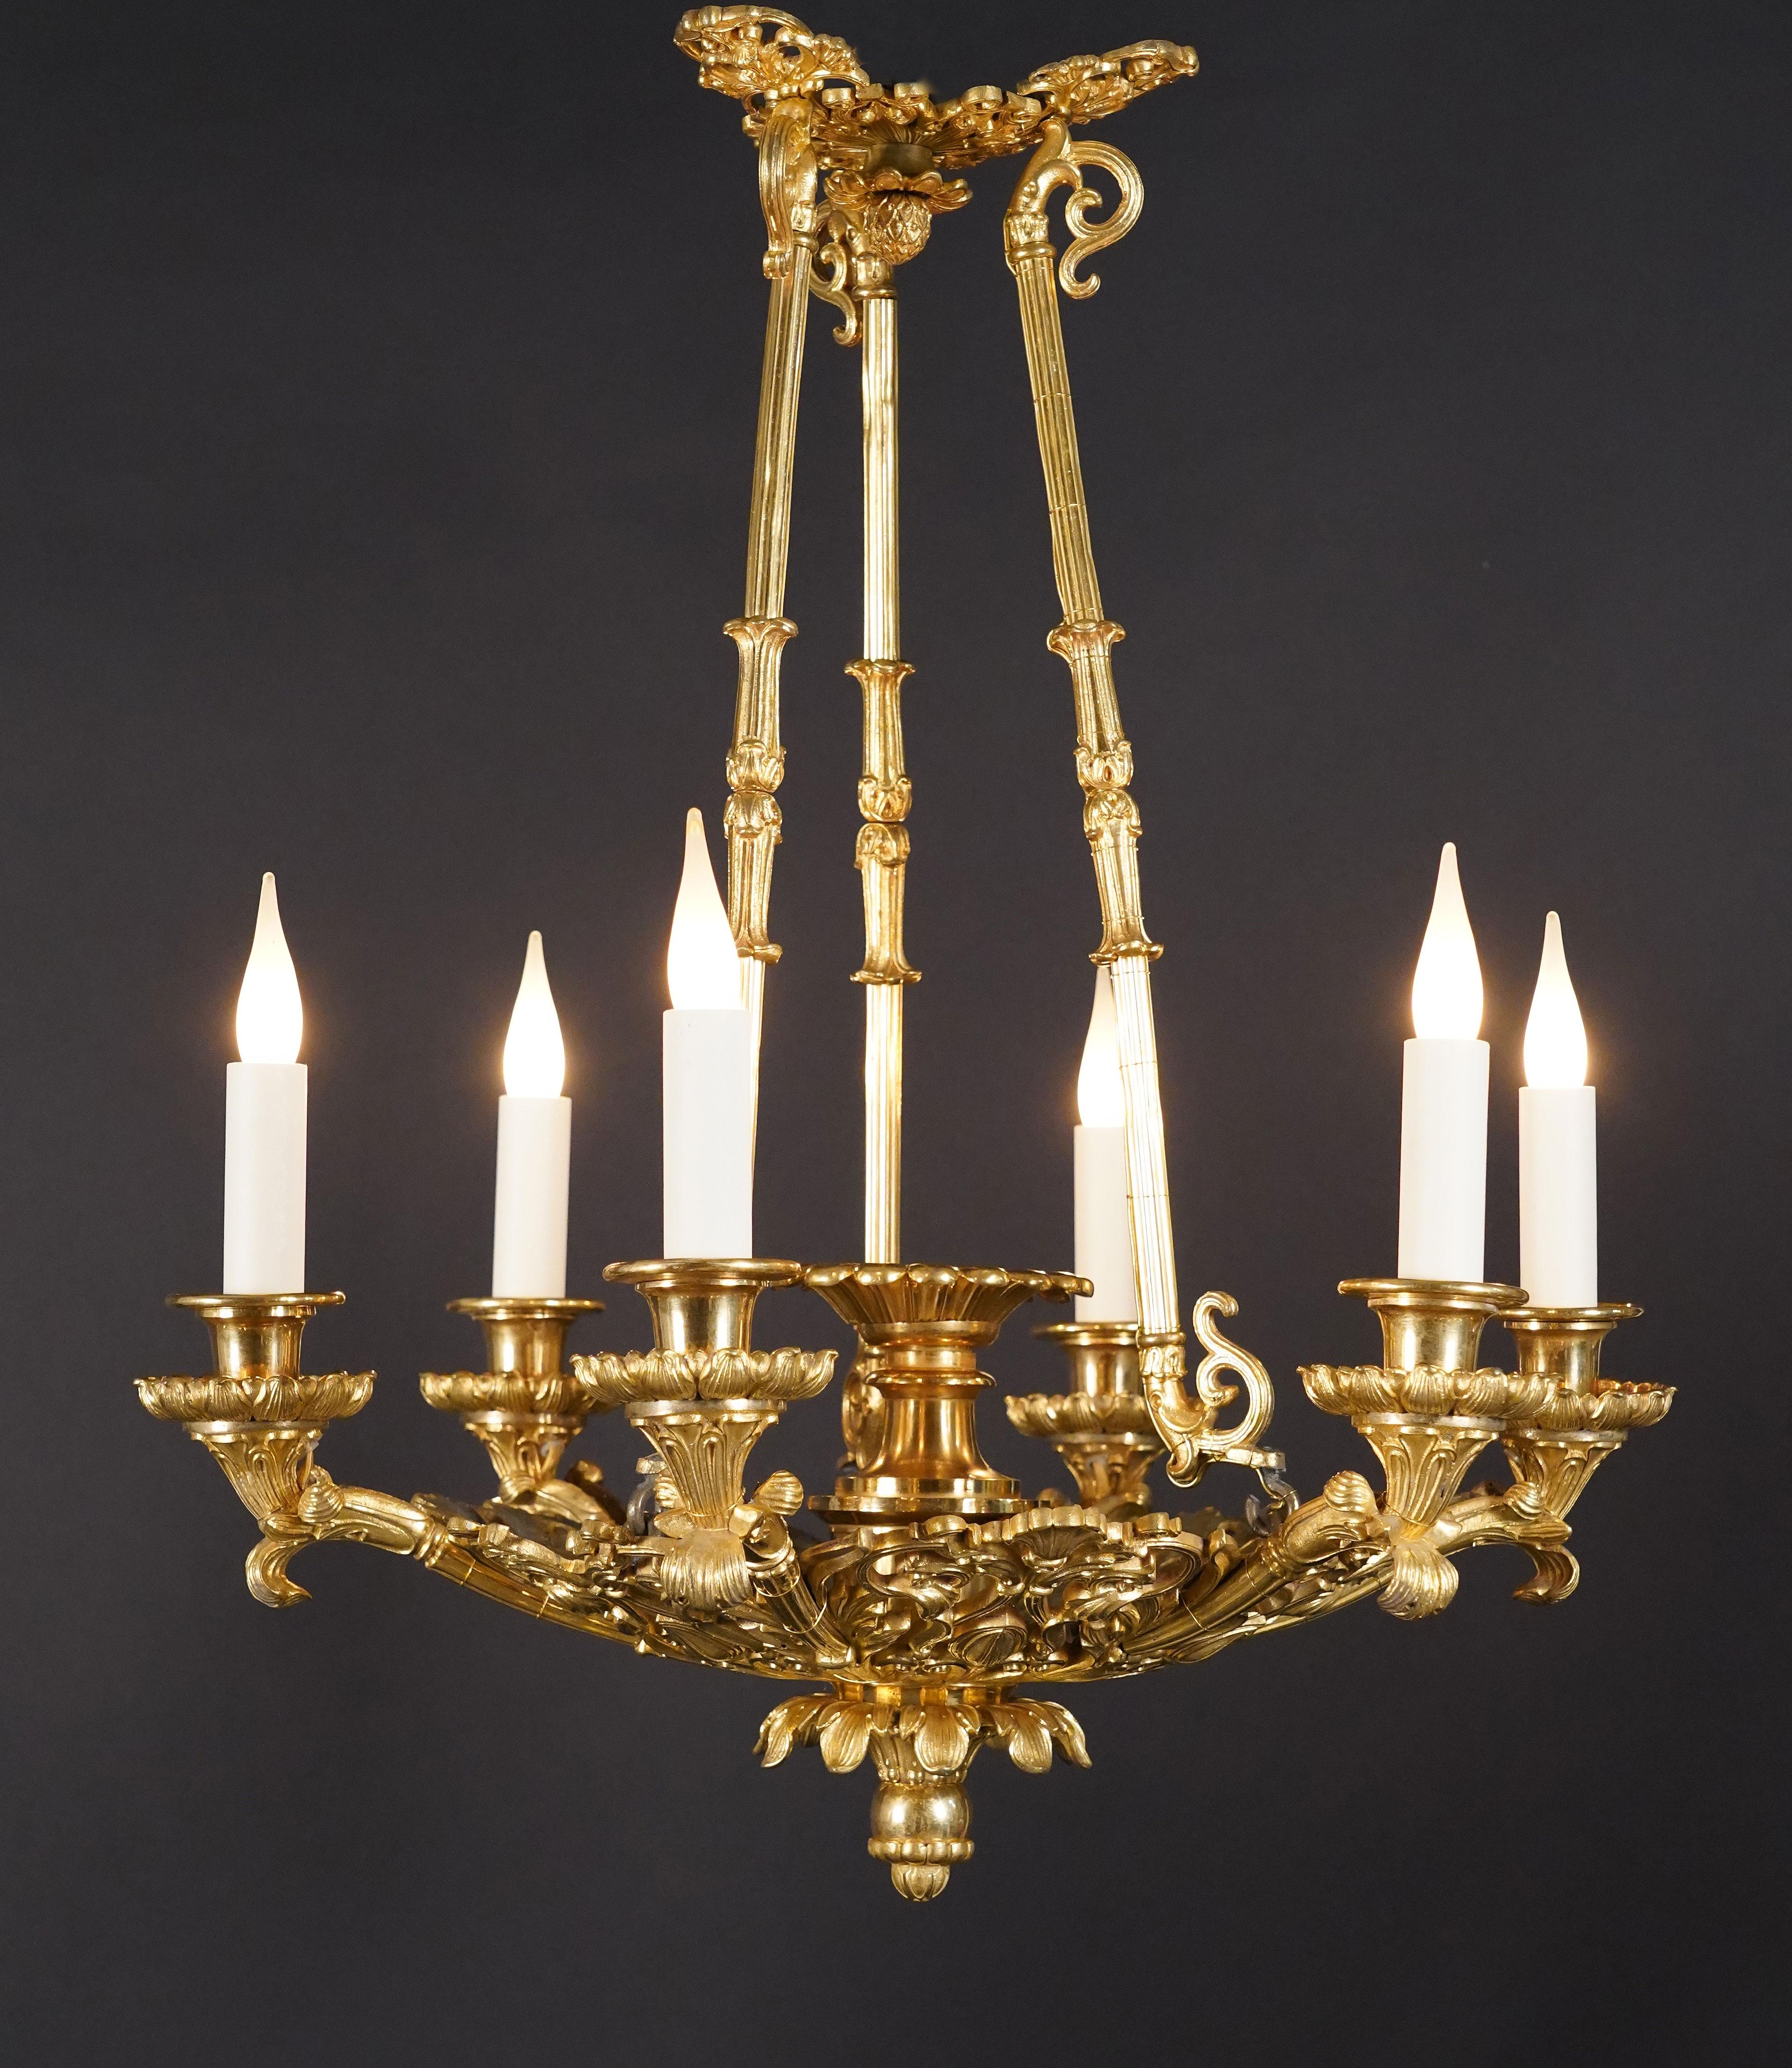 Elegant Louis-Philippe period chandelier in chased and gilded mercury bronze. The central part is composed of an openwork decor of foliate scrolls and shells from which six arms of light emerge, the whole supported by three uprights ending in a